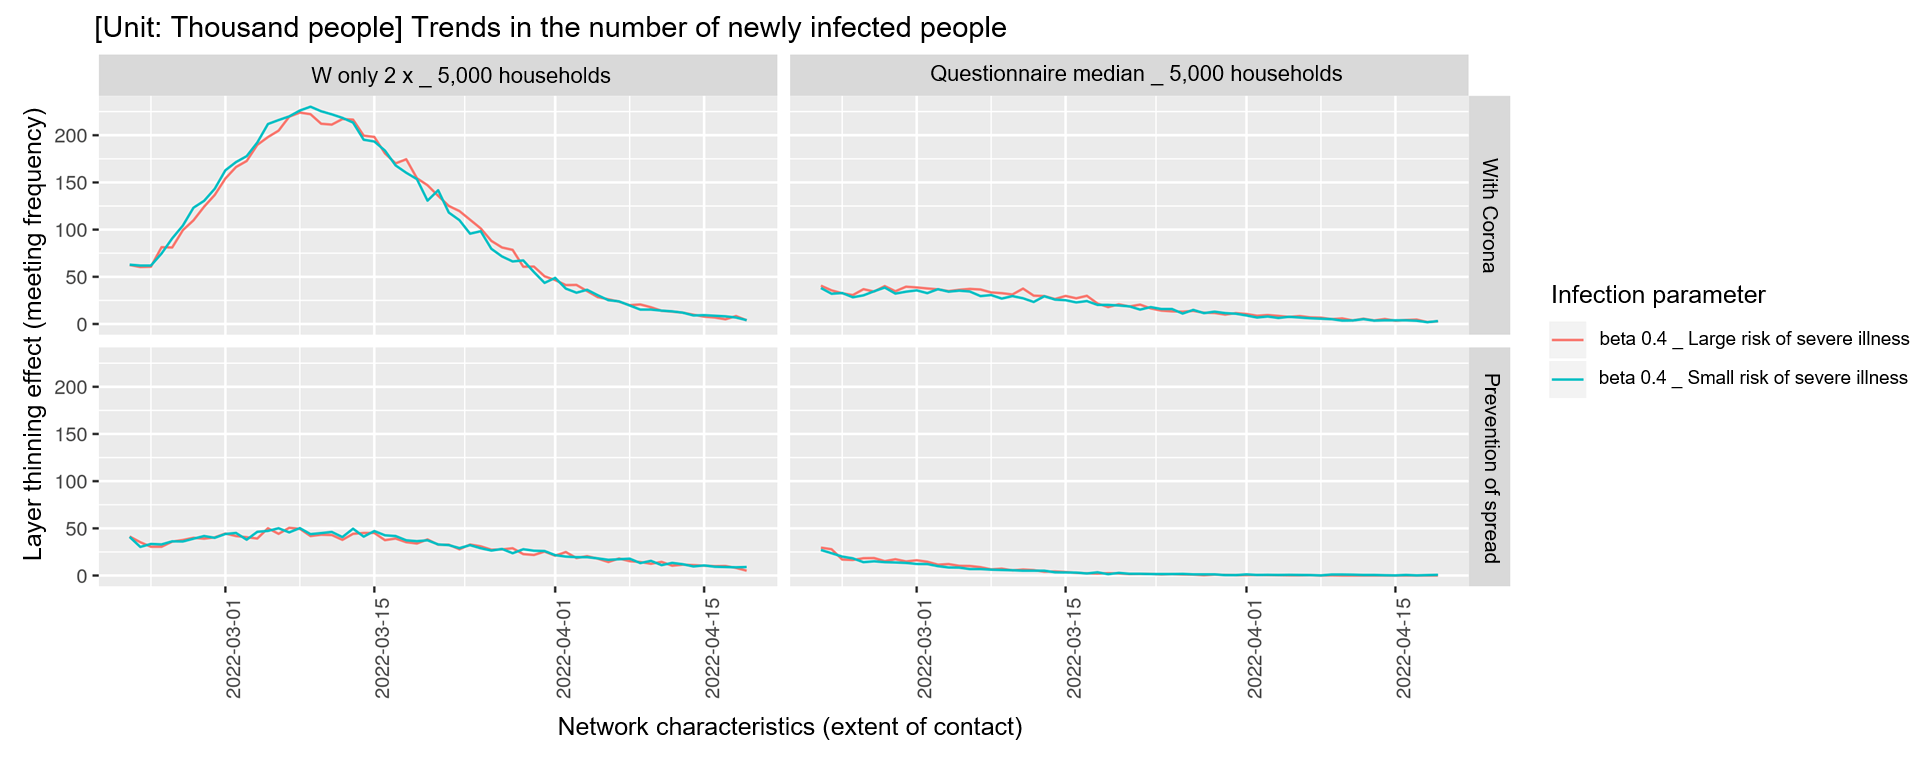 Model B Results: Number of Newly Infected People (beta = 0.4 only / 2*2 cells expanded in the lower right of the previous section)